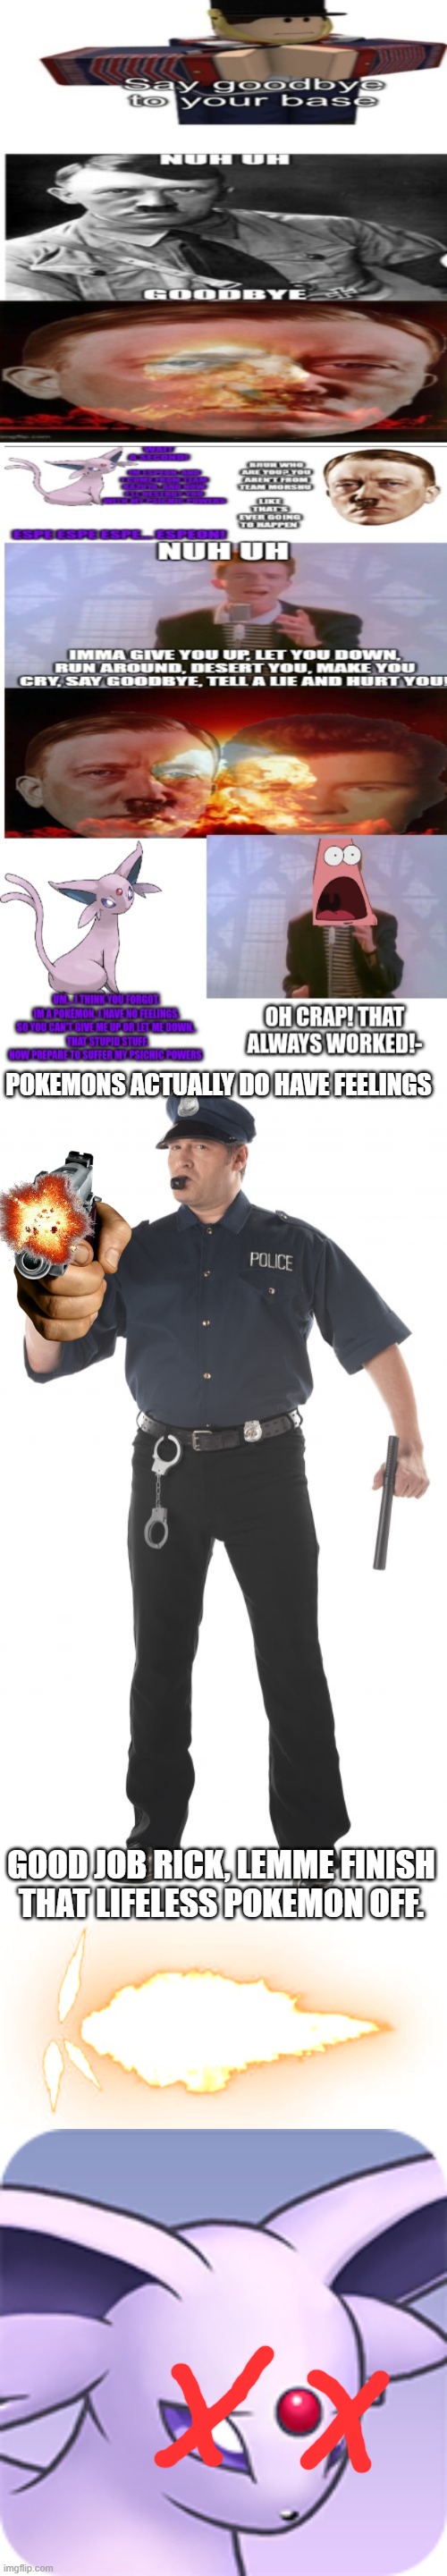 Nuh uh you lazy red panda | POKEMONS ACTUALLY DO HAVE FEELINGS; GOOD JOB RICK, LEMME FINISH THAT LIFELESS POKEMON OFF. | image tagged in memes,stop cop,gunfire,sad espeon | made w/ Imgflip meme maker